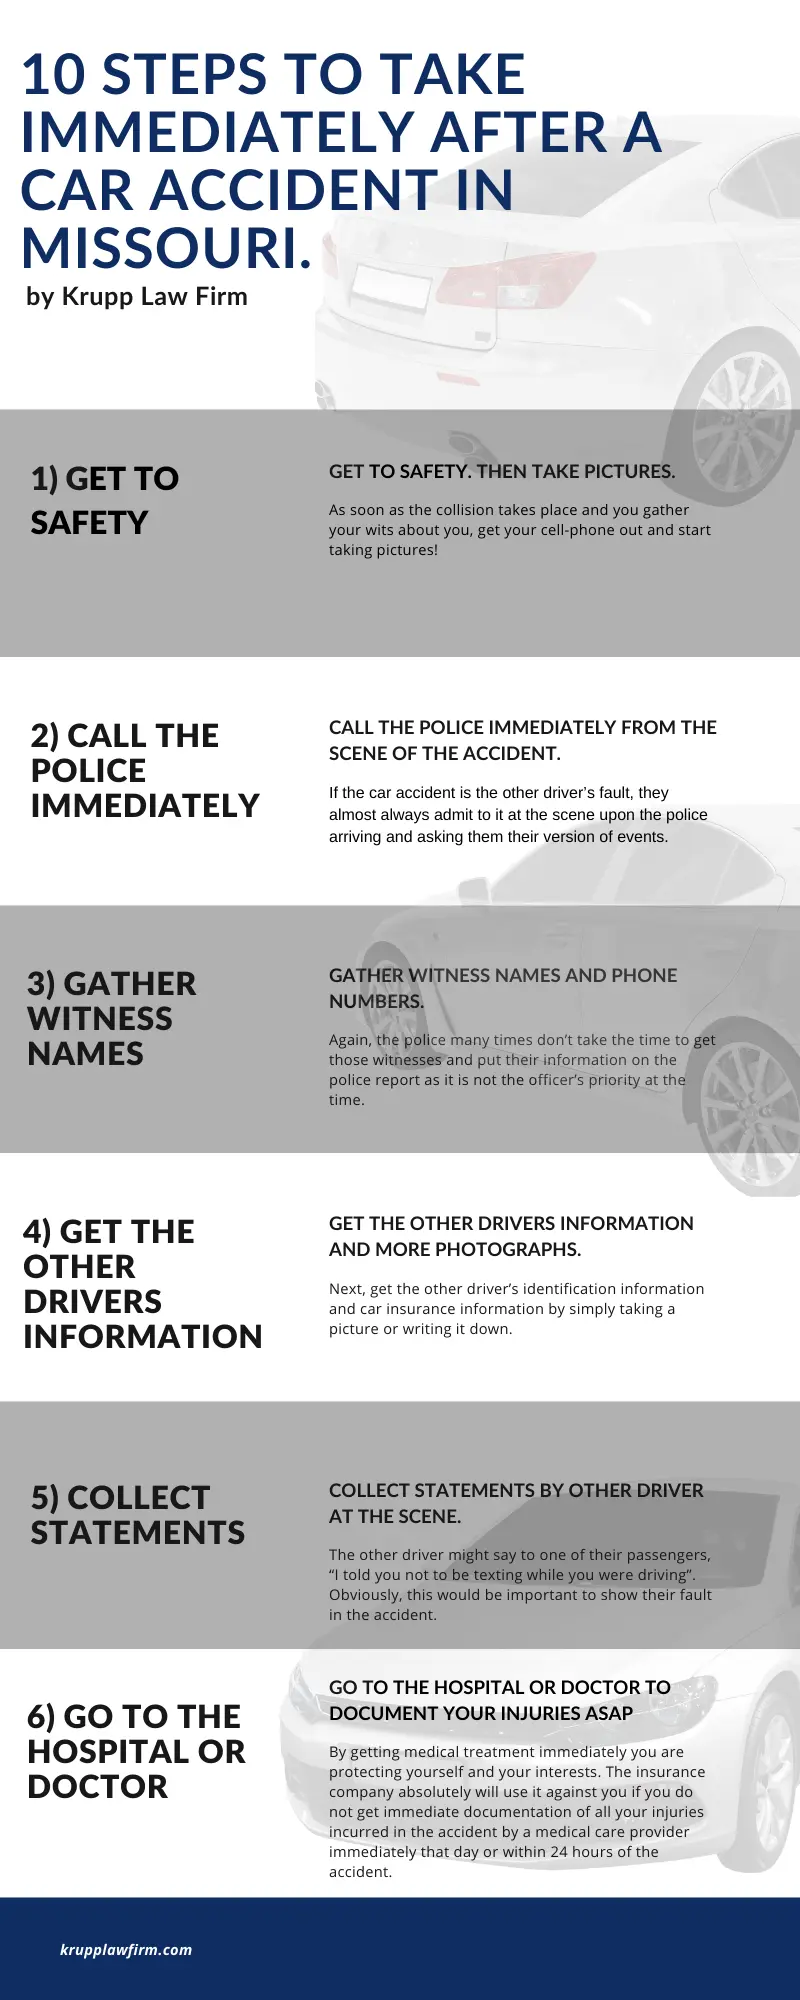 ten steps to take after a car accident infographic 1